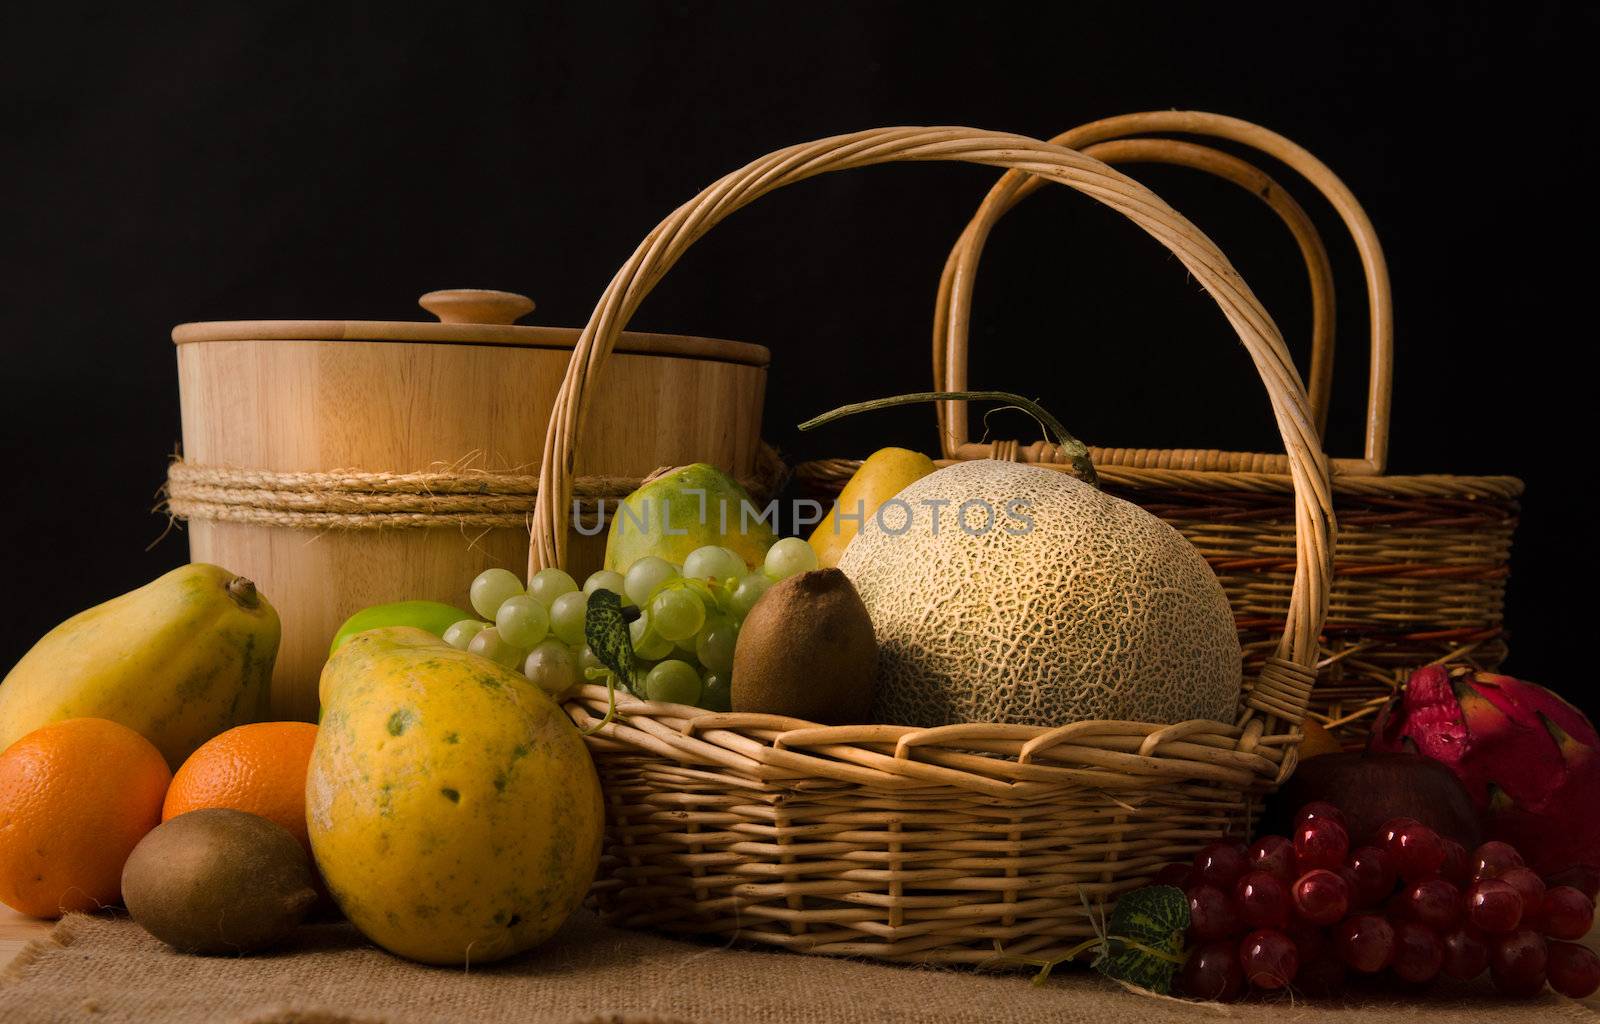 group fruits in dark background by yuliang11